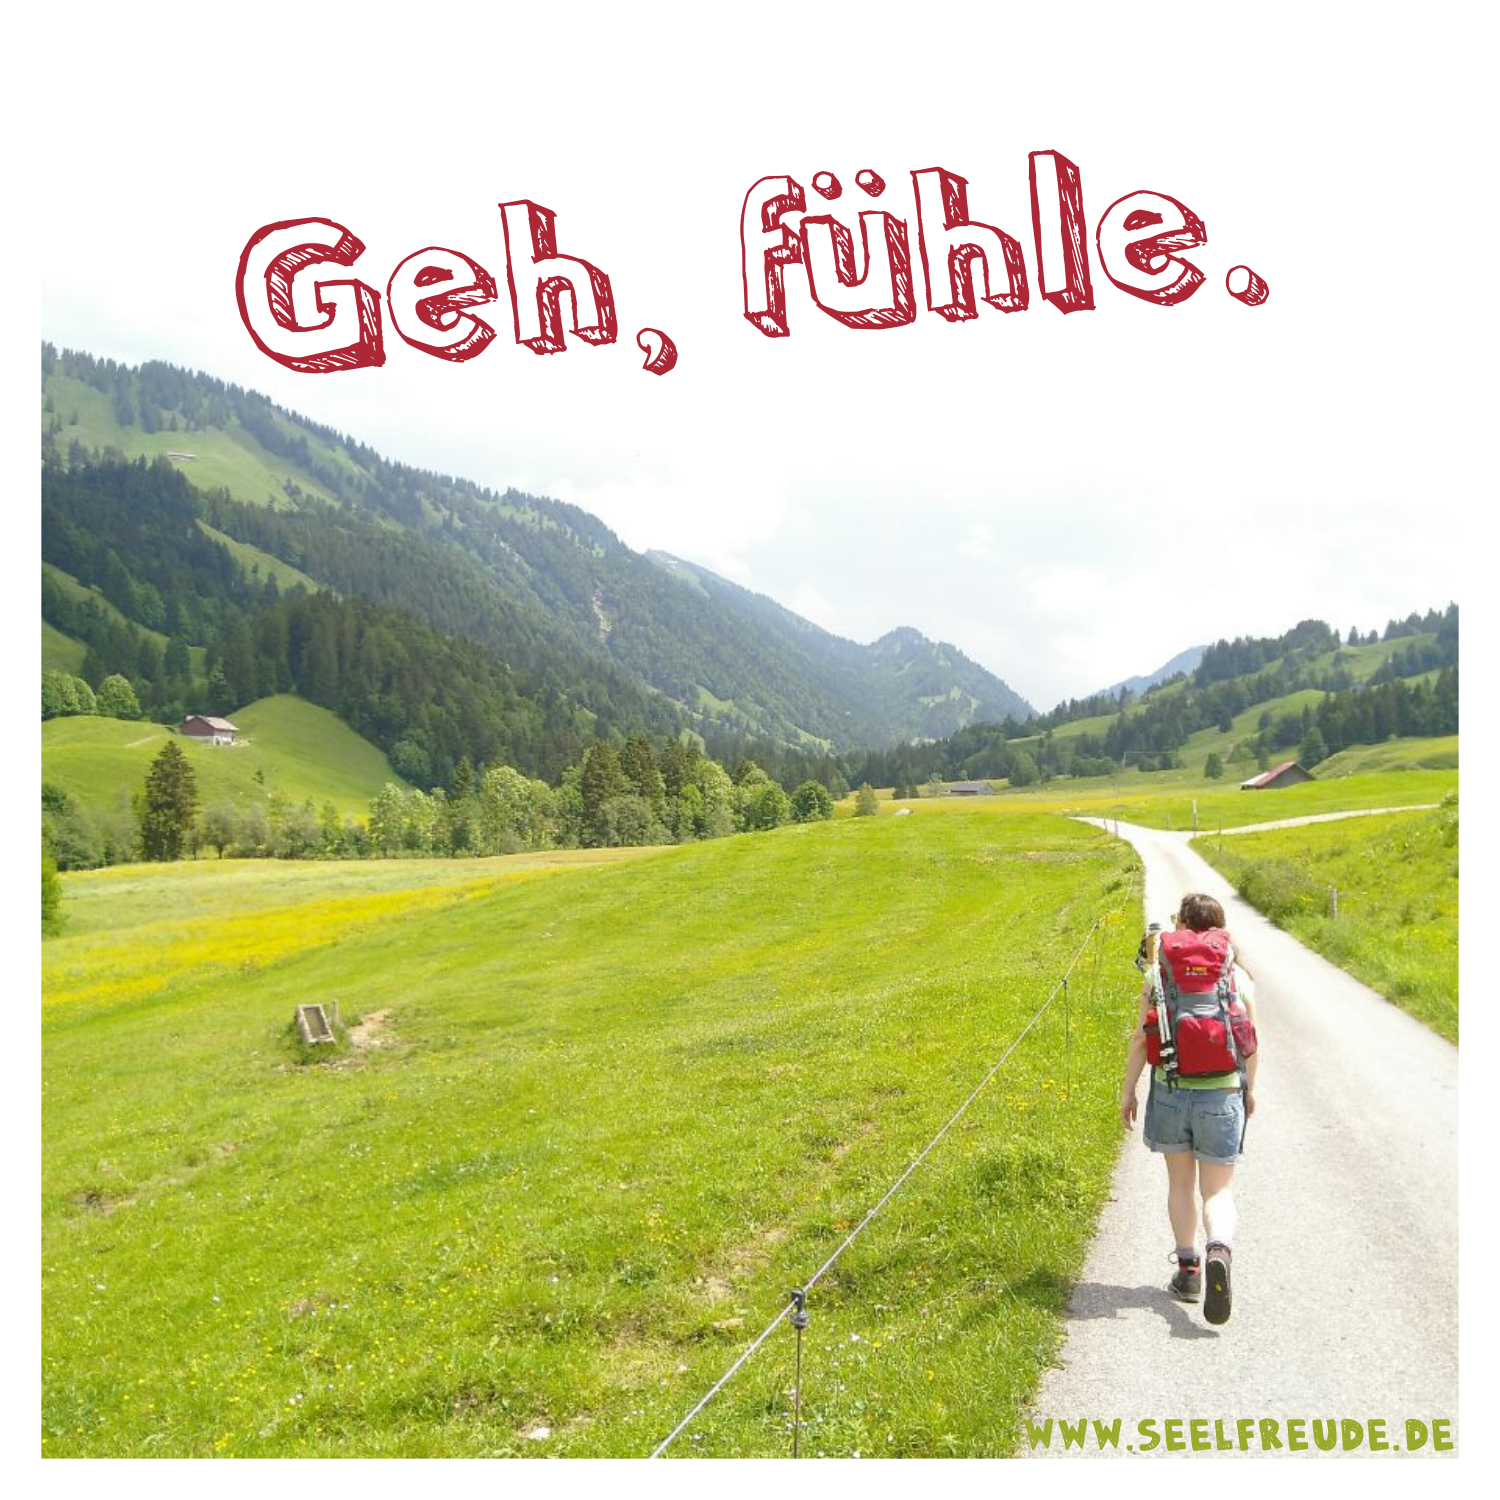 You are currently viewing Geh, fühle.